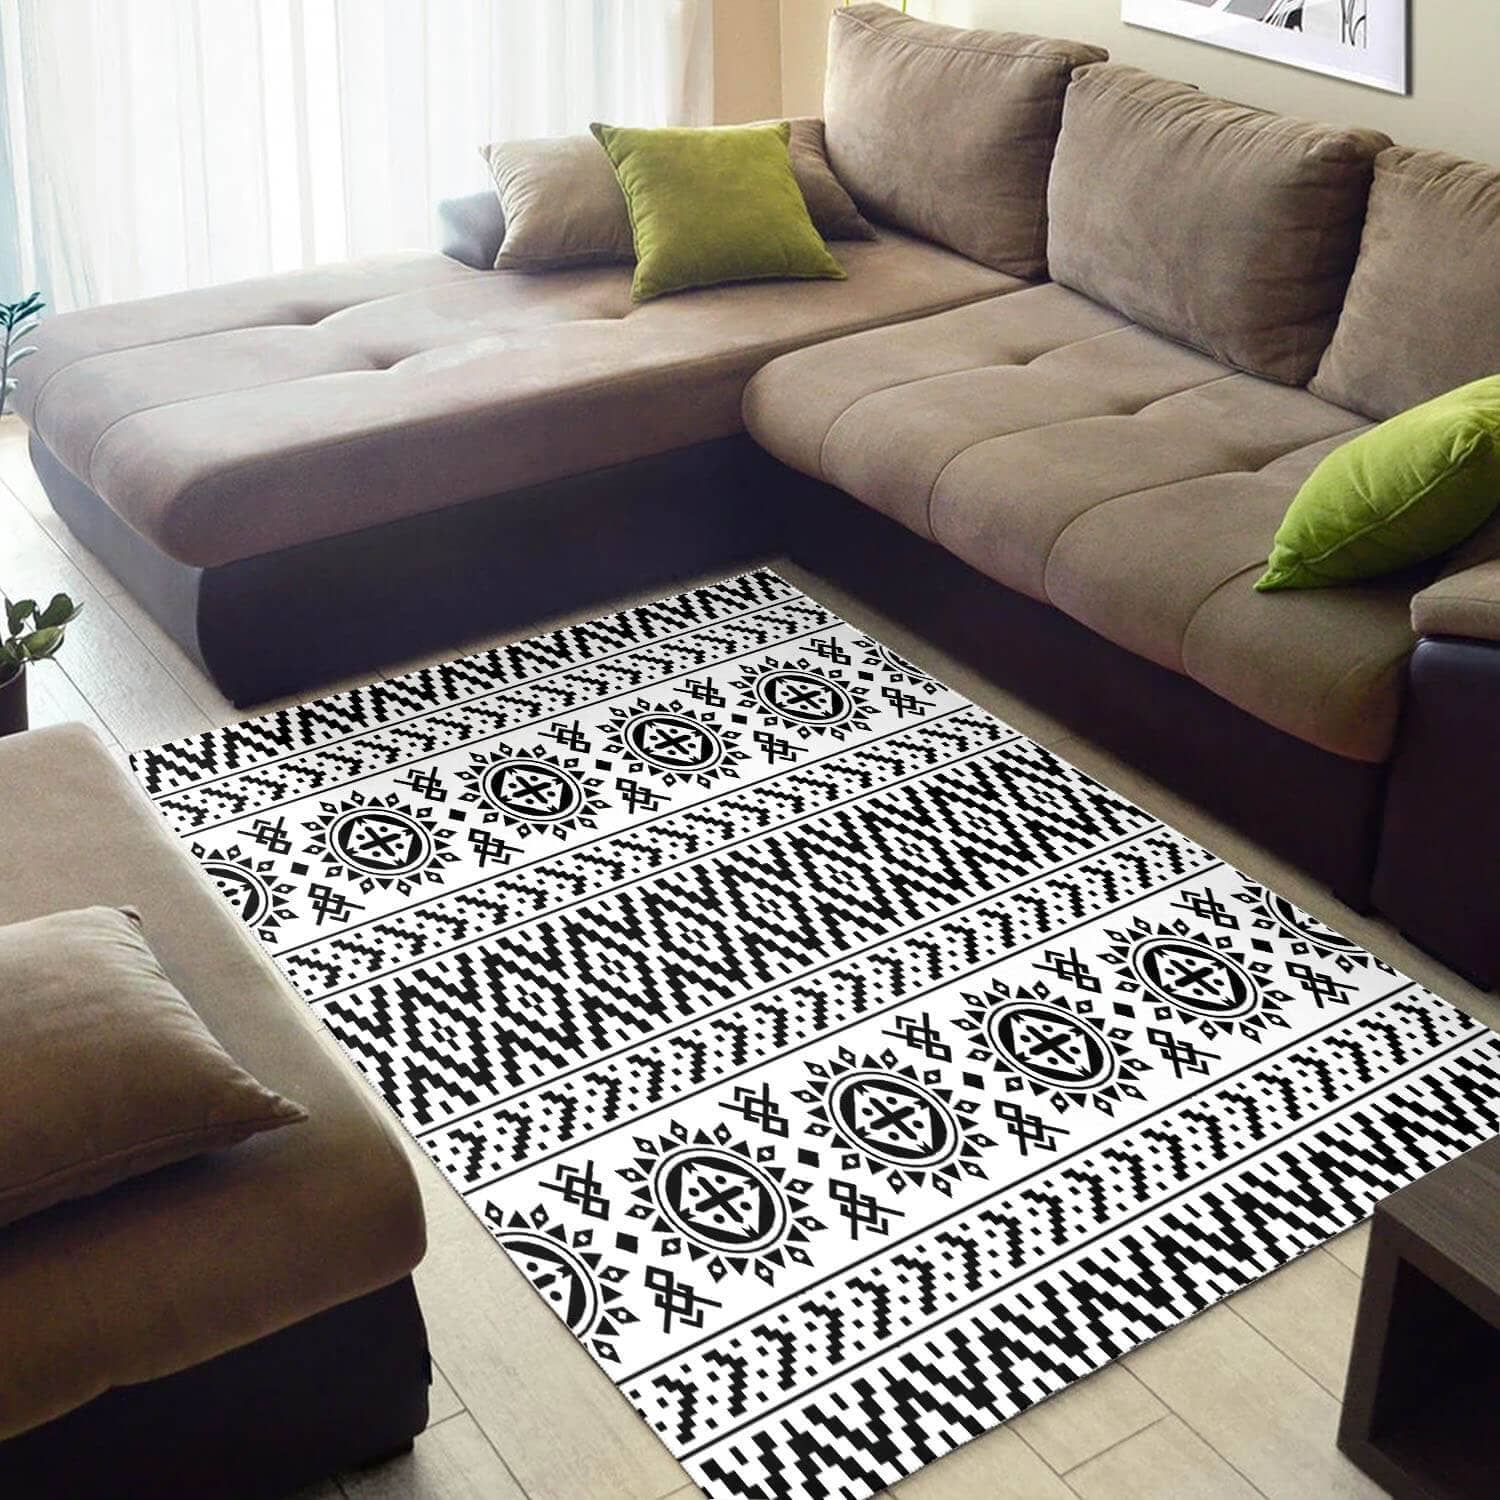 Beautiful African Cute Black History Month Ethnic Seamless Pattern Themed Room Rug